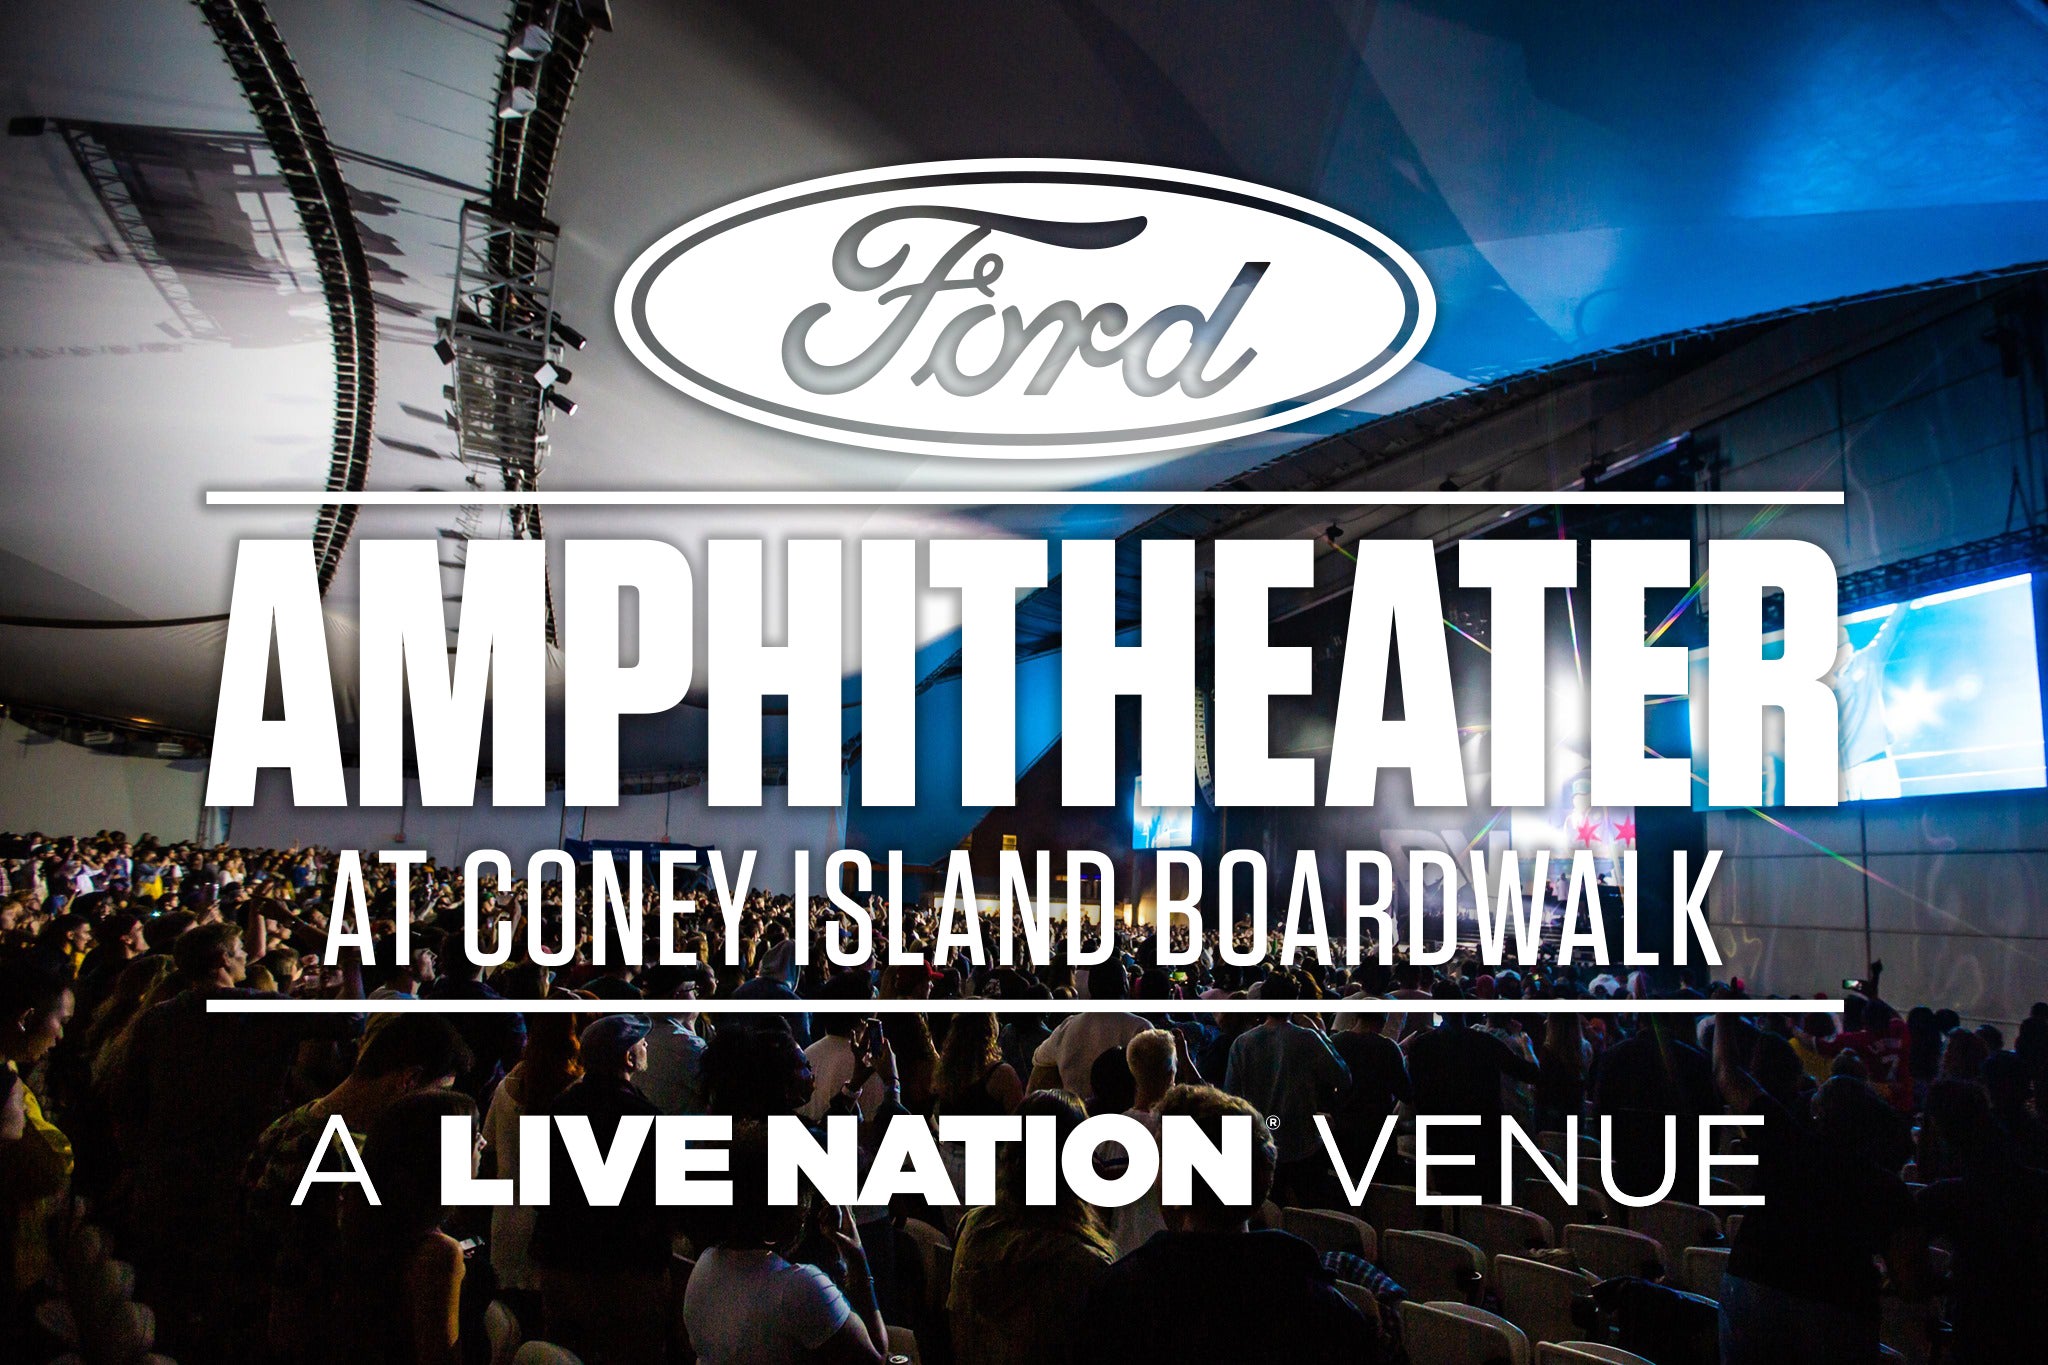 Ford Amphitheater at Coney Island Boardwalk 2020 show schedule